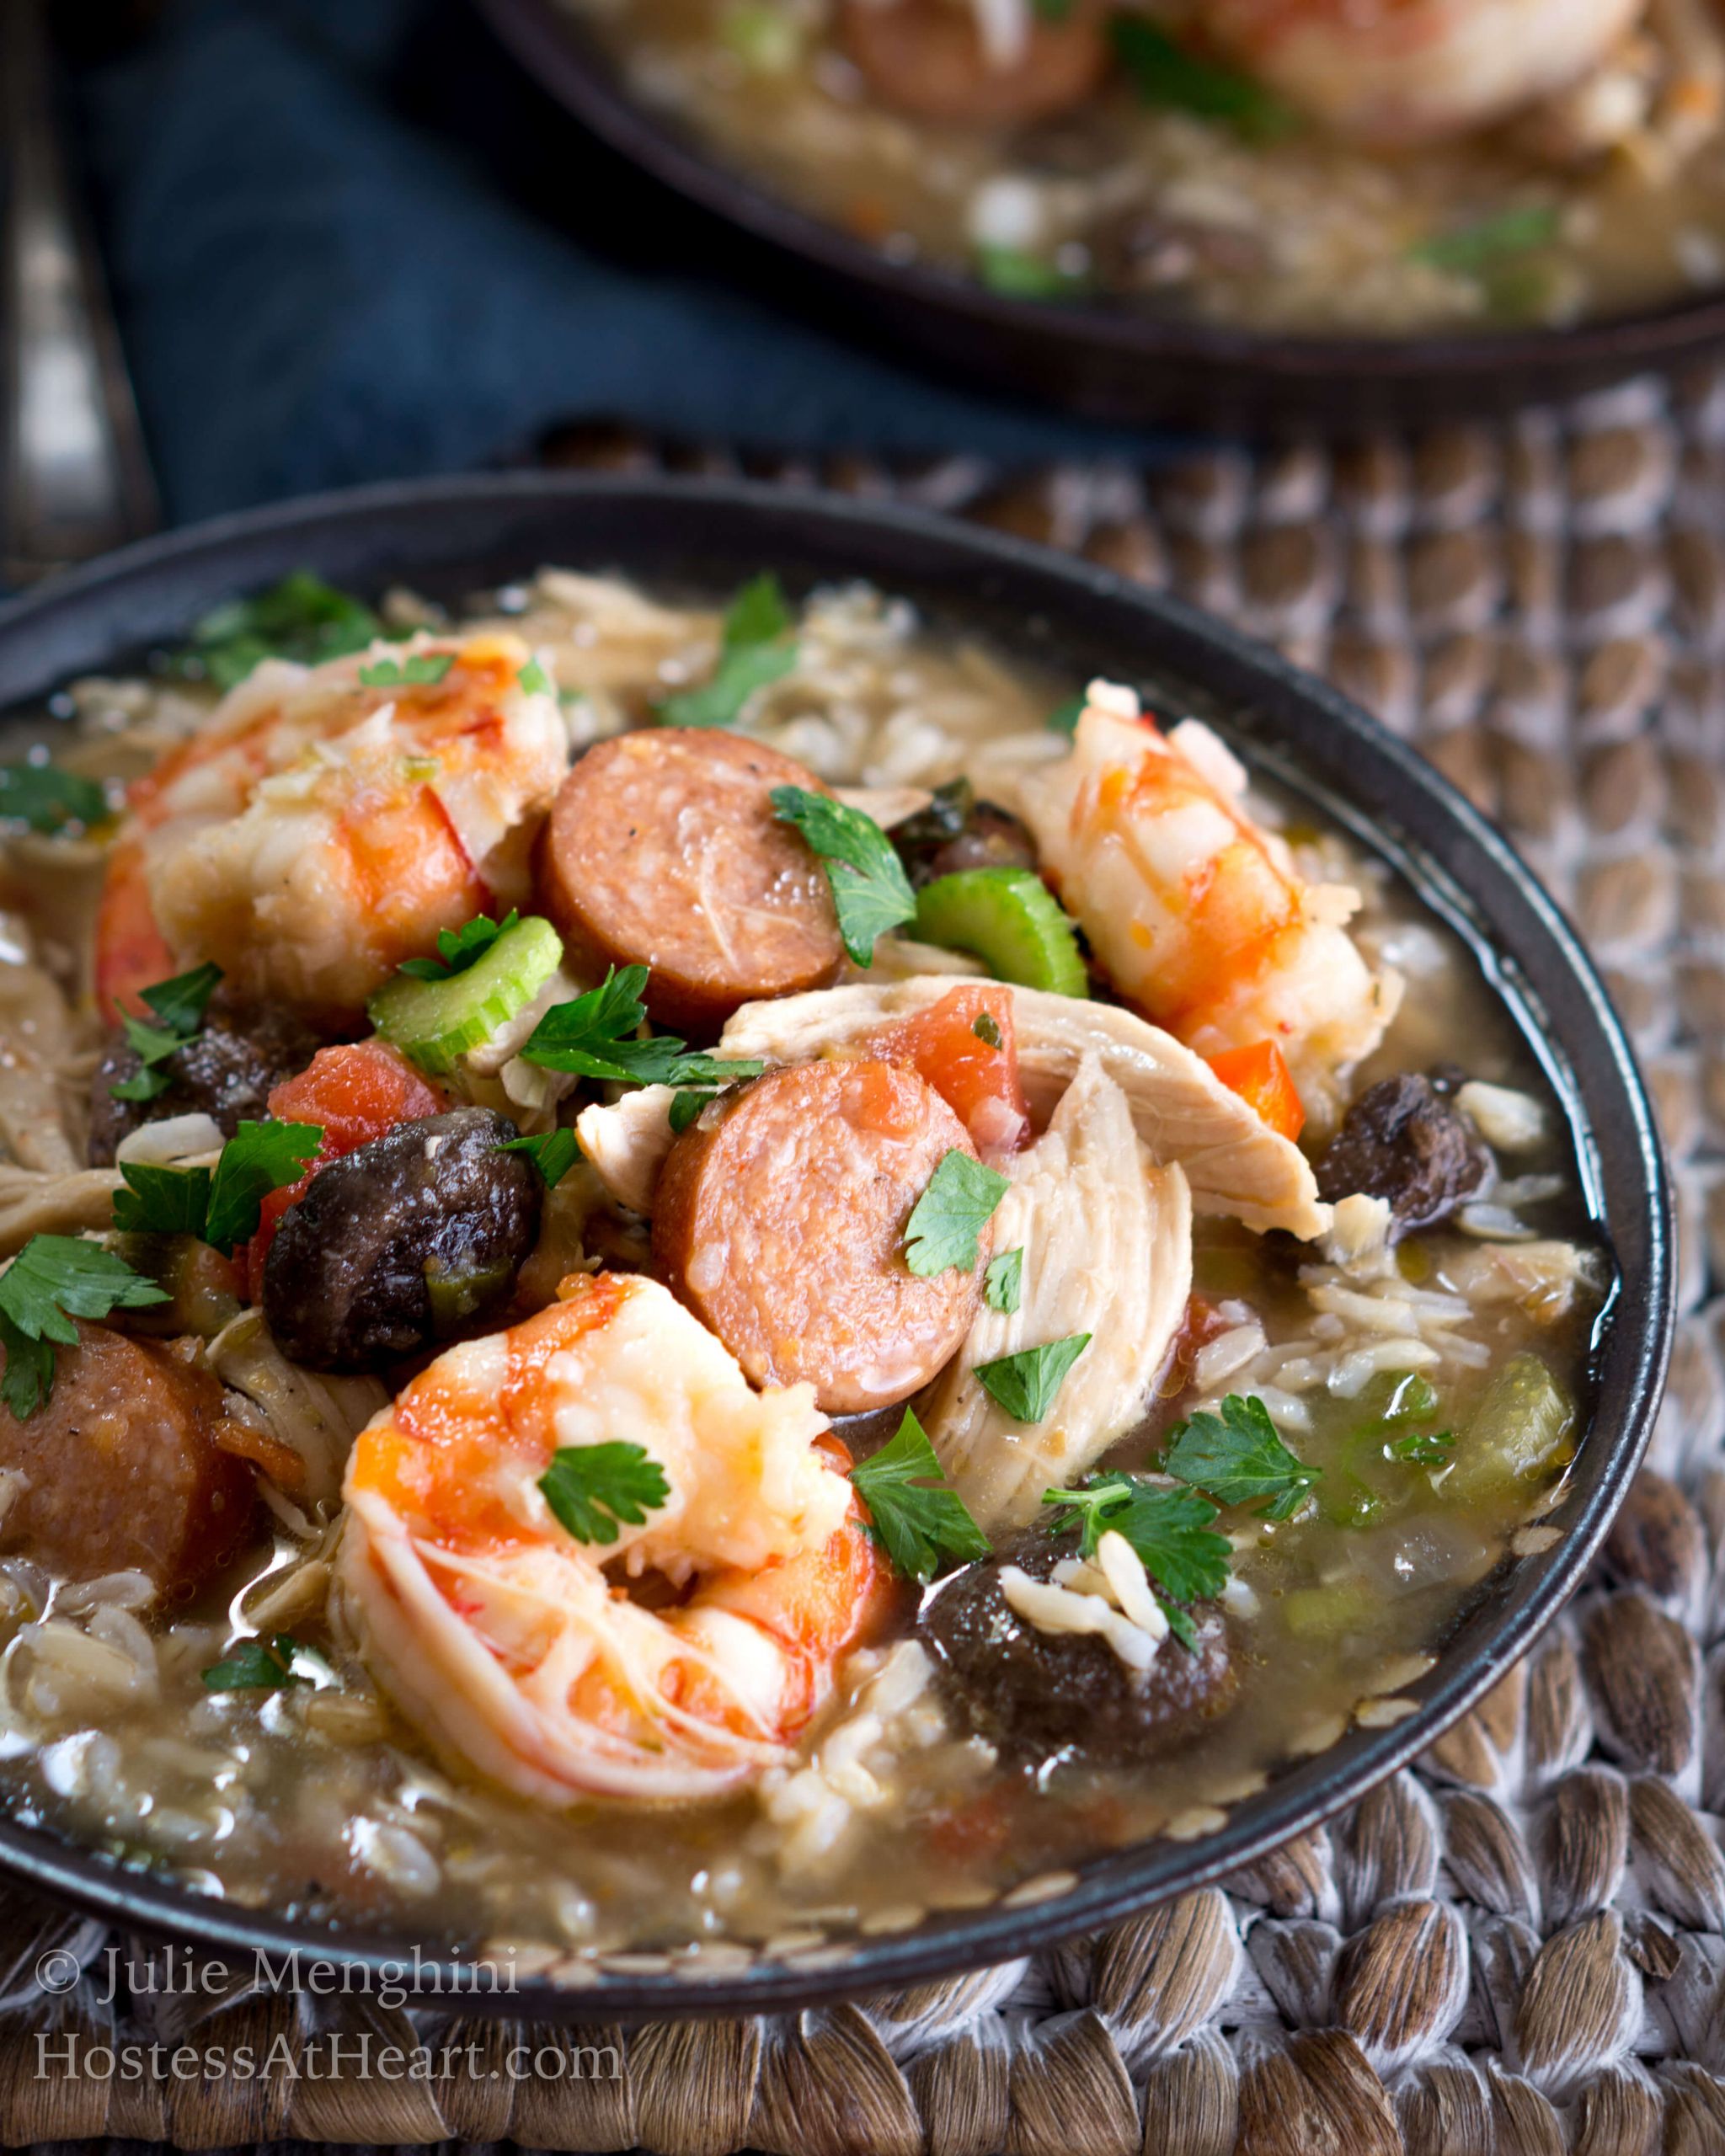 Gumbo Recipe Seafood Chicken And Sausage
 Chicken Shrimp and Sausage Gumbo Recipe